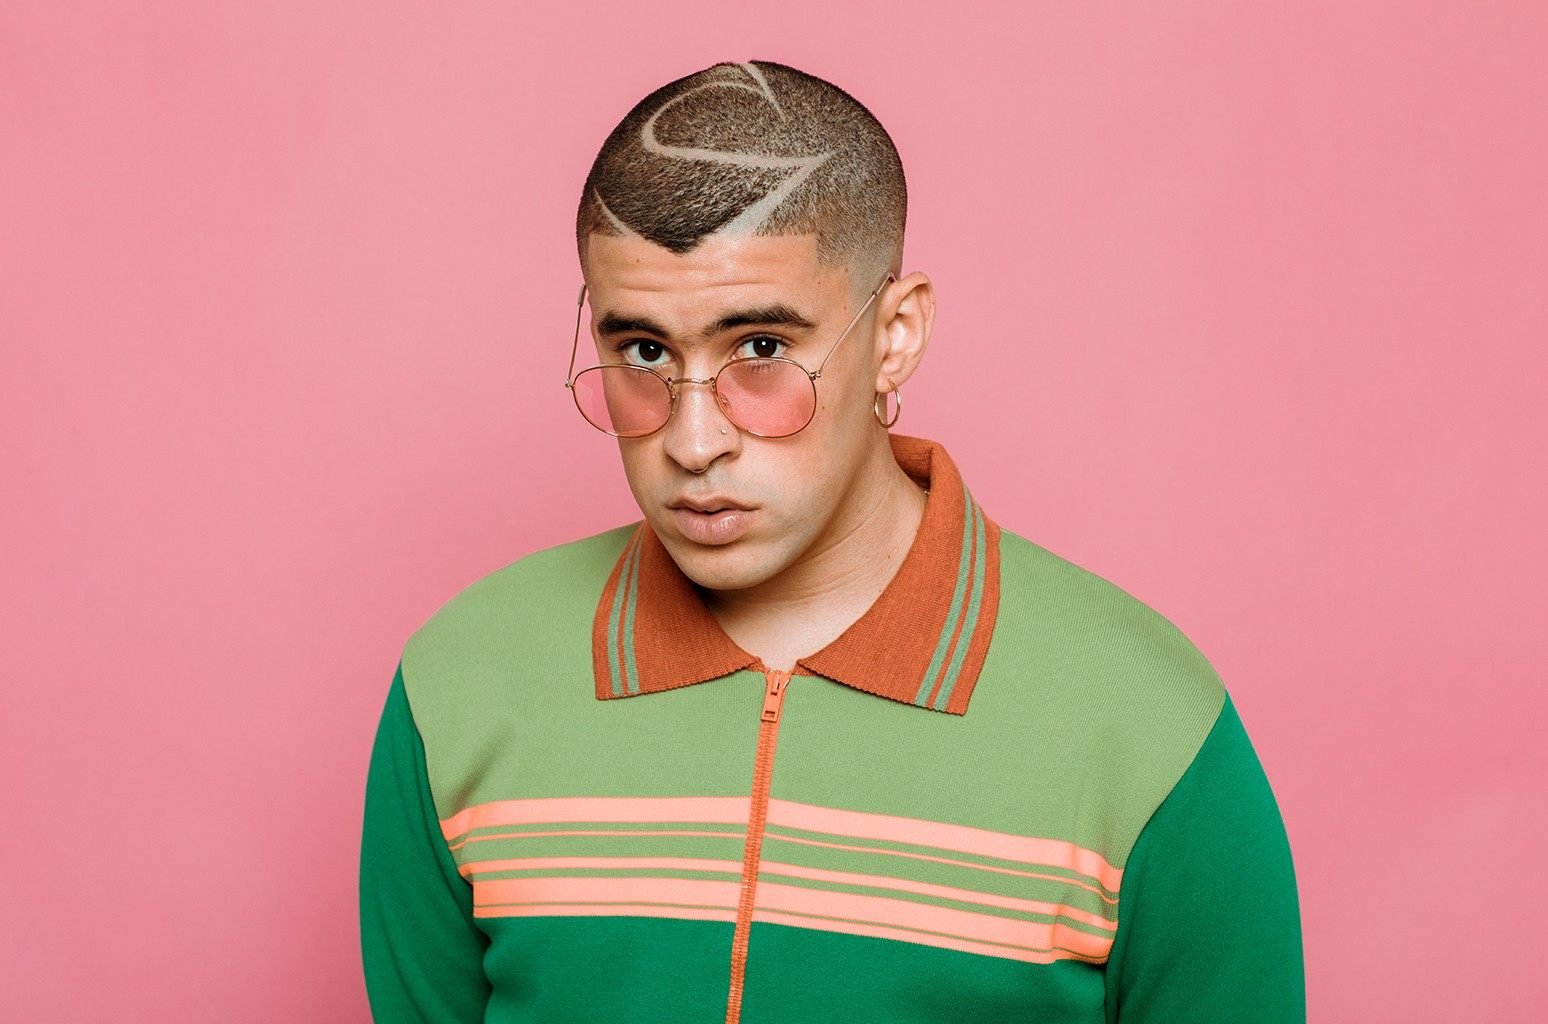 Puerto Rican rapper Bad Bunny is making millions and spending it too. Photo: Universal Latin